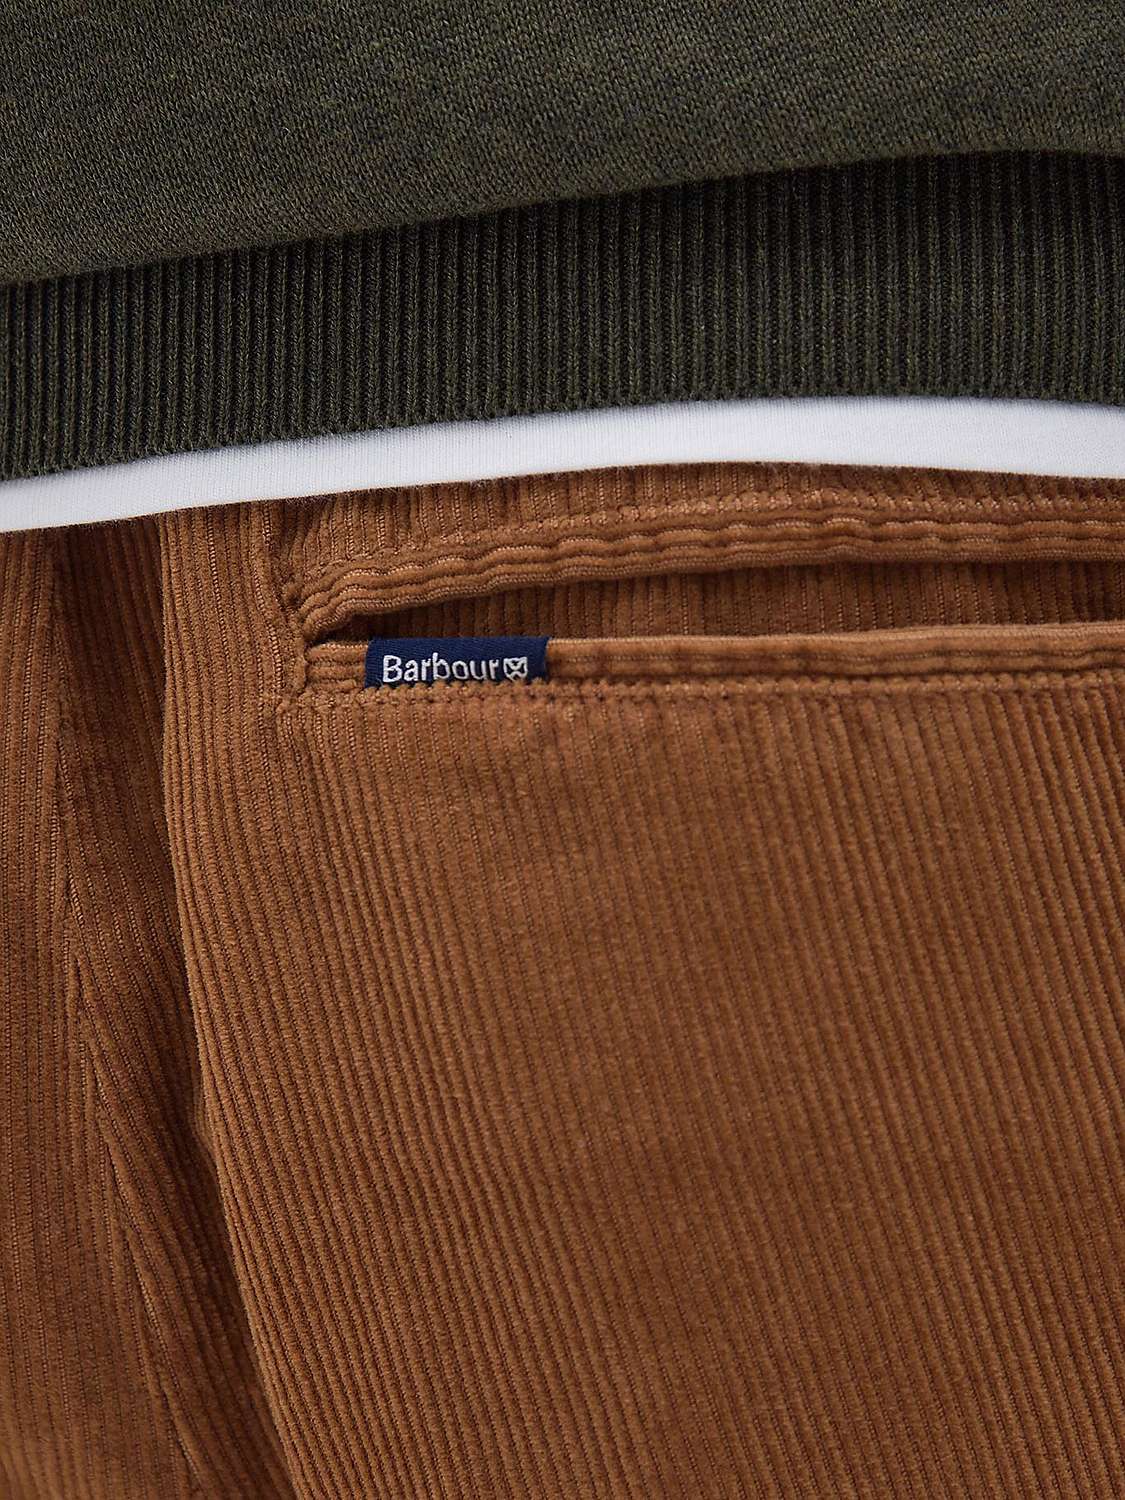 Buy Barbour Spedwell  Cotton Corduroy Trousers, Cinnamon Online at johnlewis.com